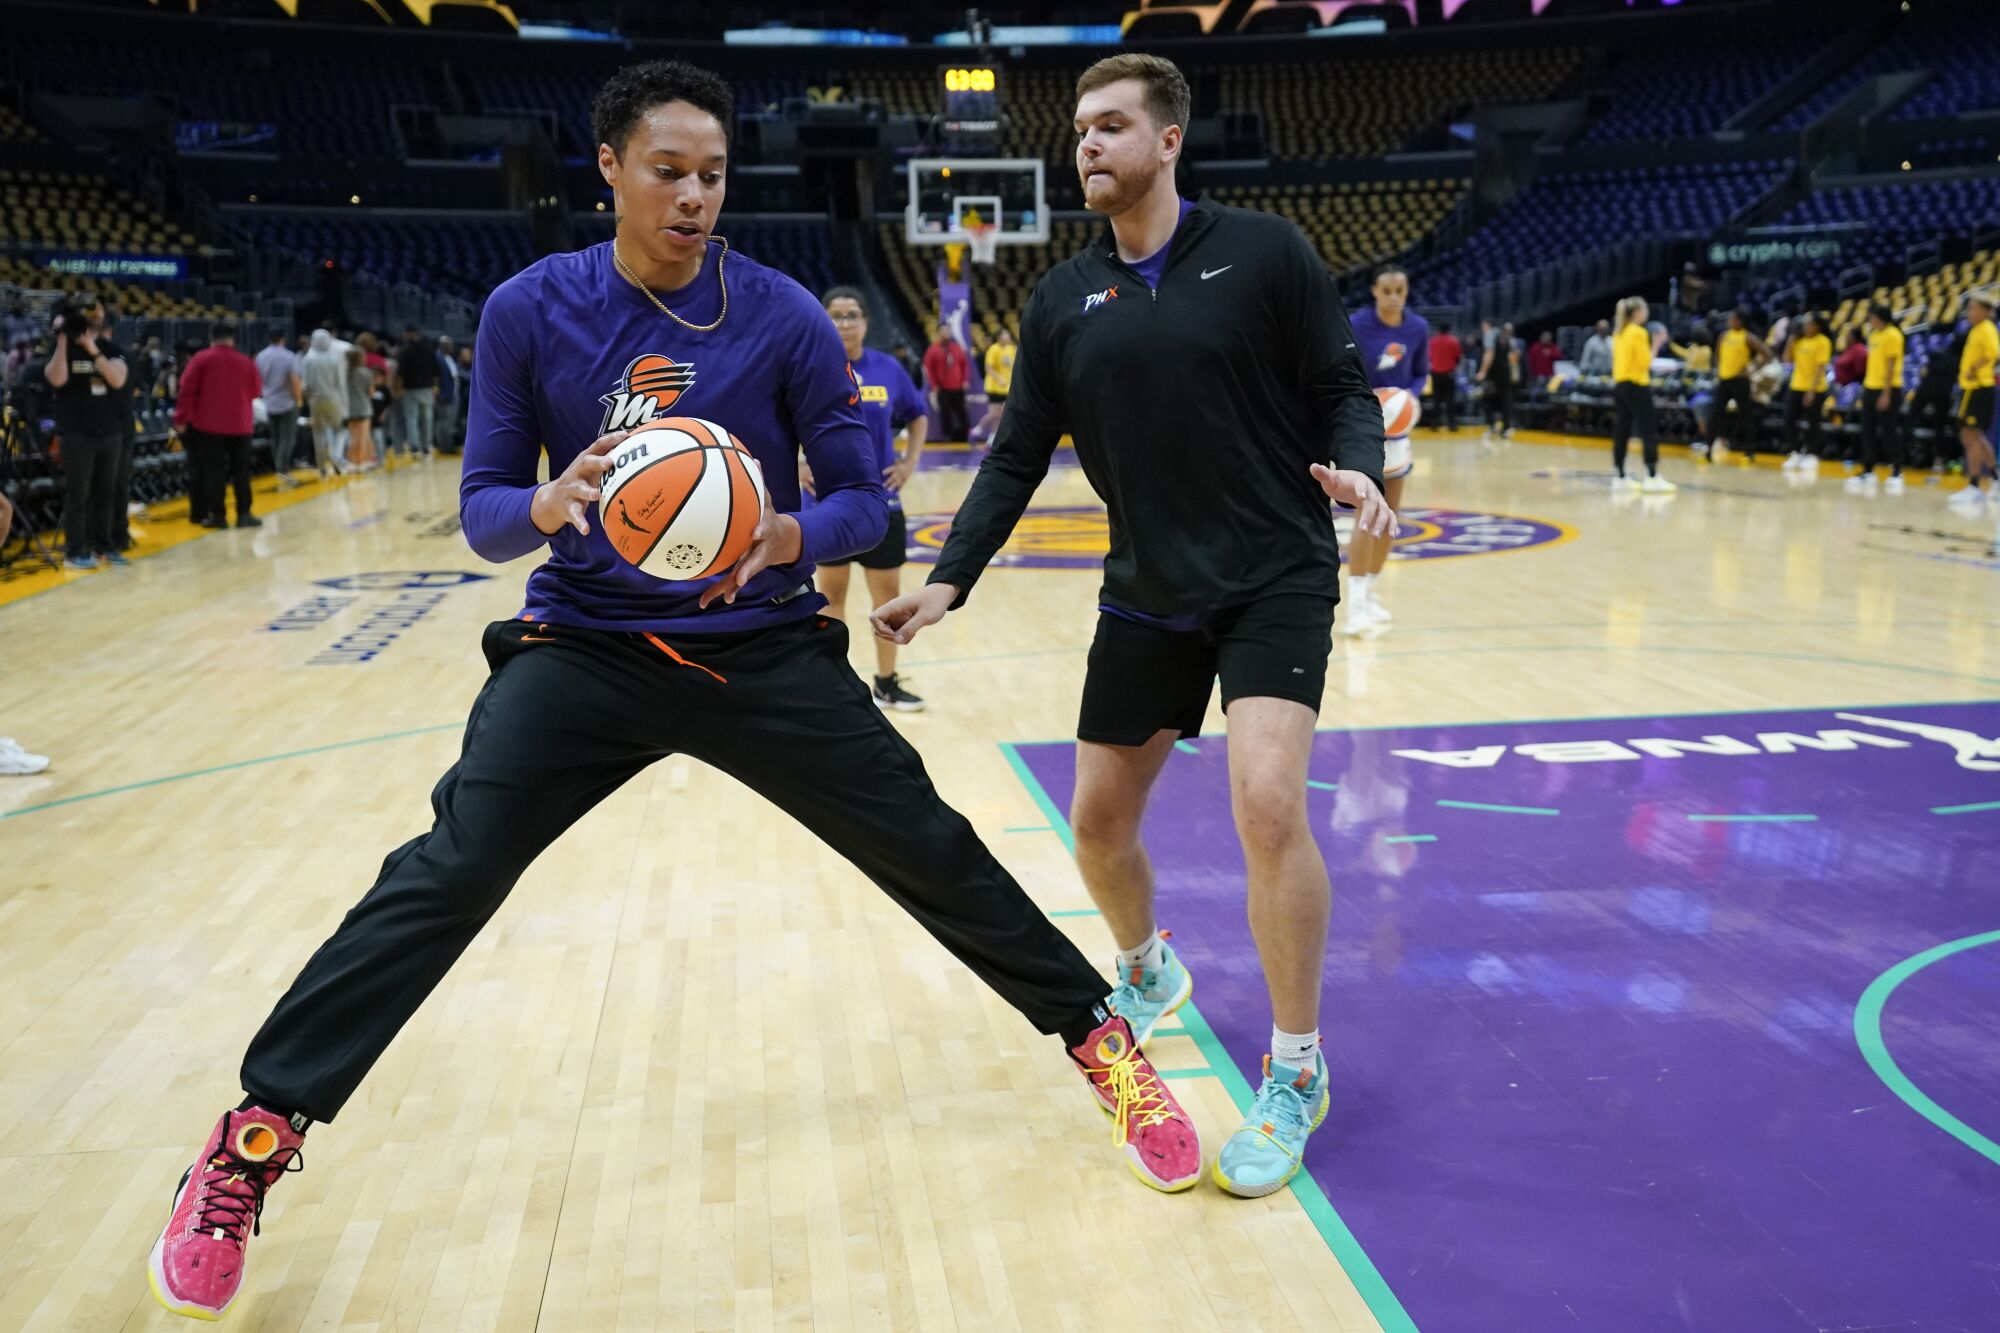 Phoenix Mercury center Brittney Griner holds the basketball while a staffer watches over her during a pregame warm-up